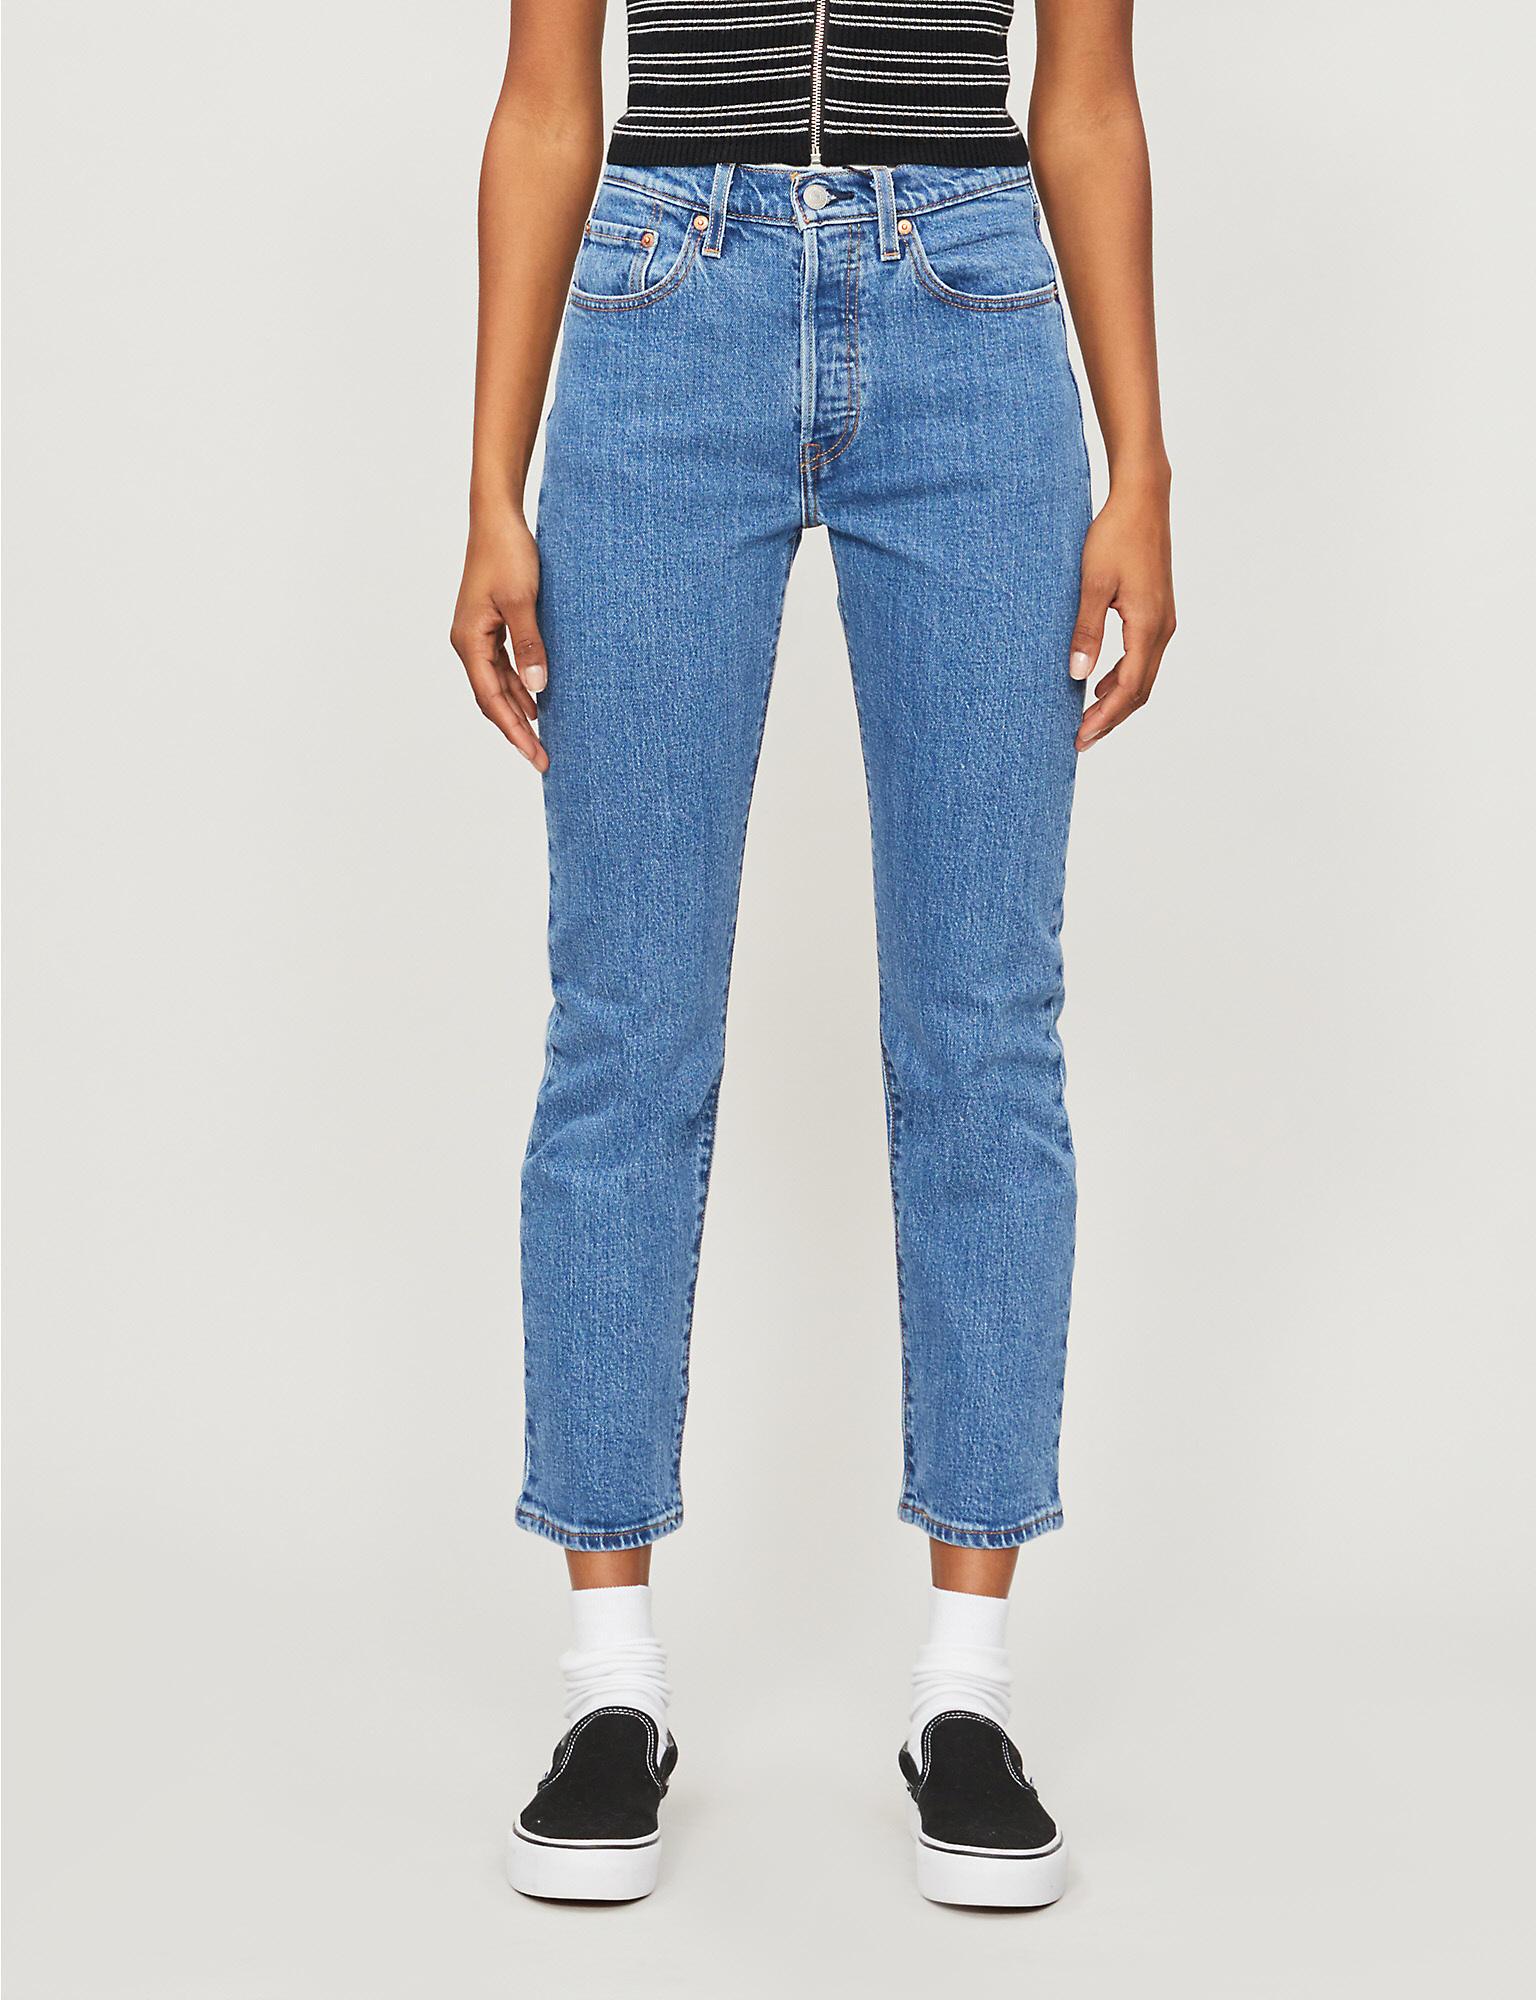 Levi's Denim 501 Cropped Straight High-rise Jeans in Blue - Lyst